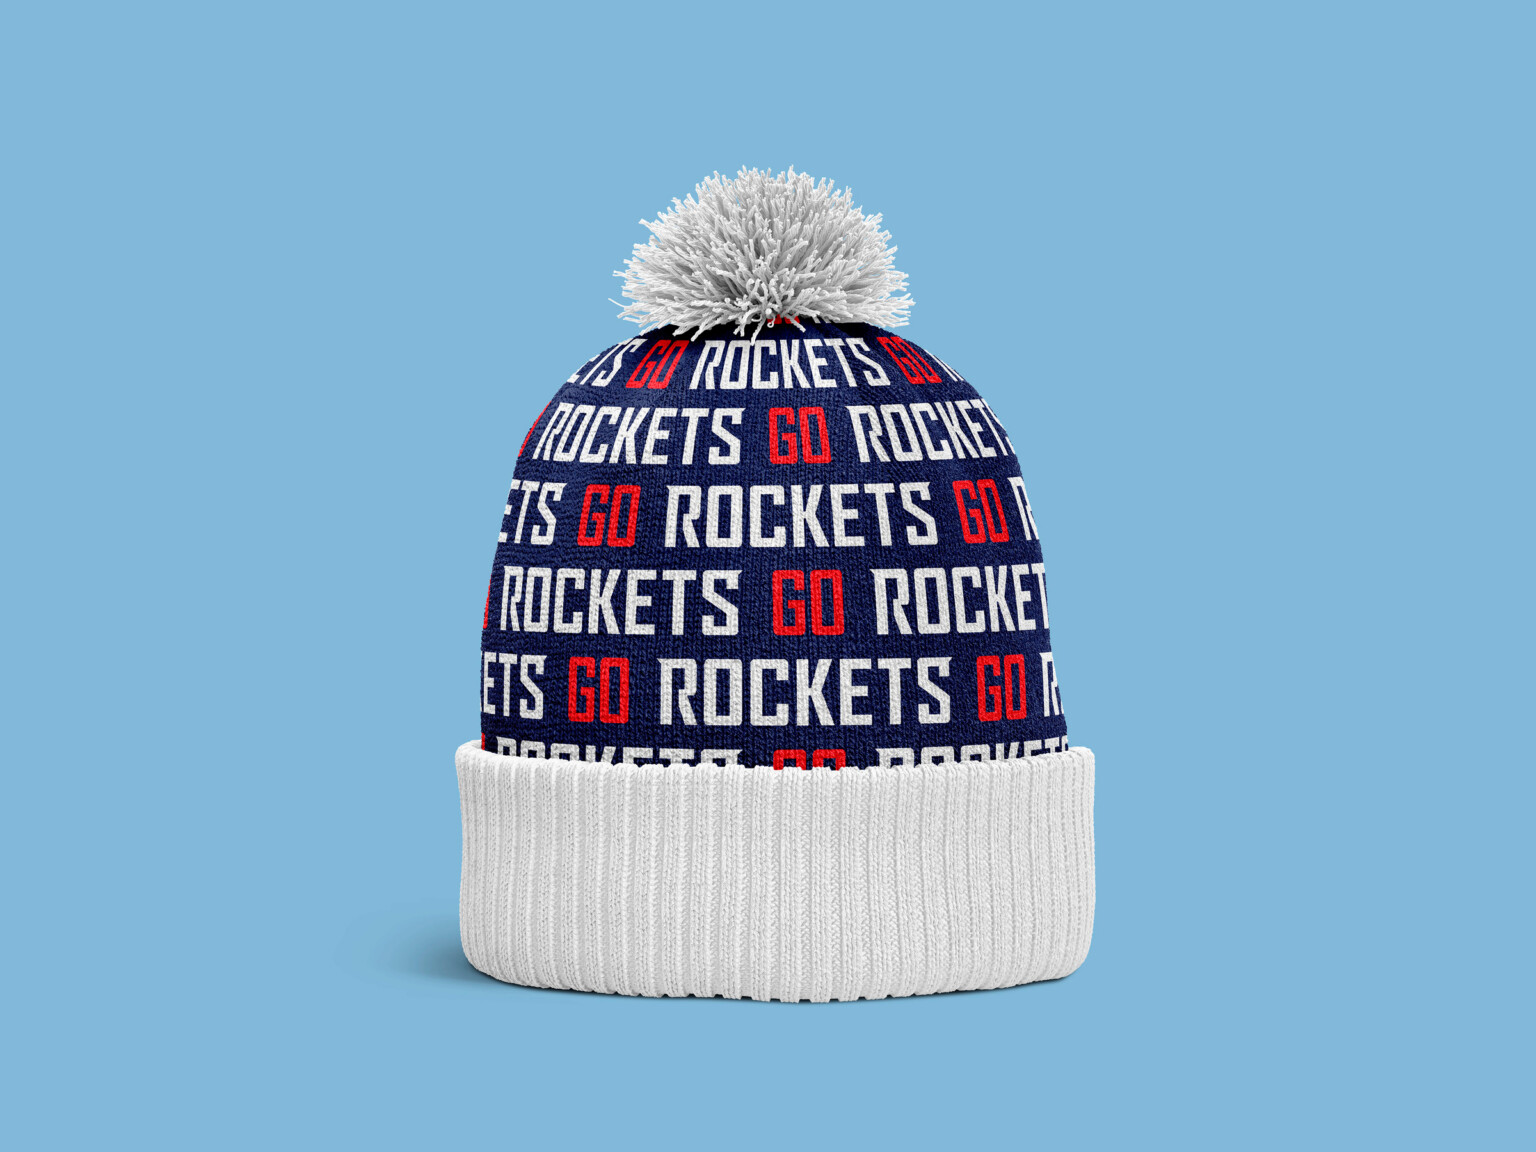 Beanie hat with pompom, hat has go rockets written repeatedly in red and white on a blue background